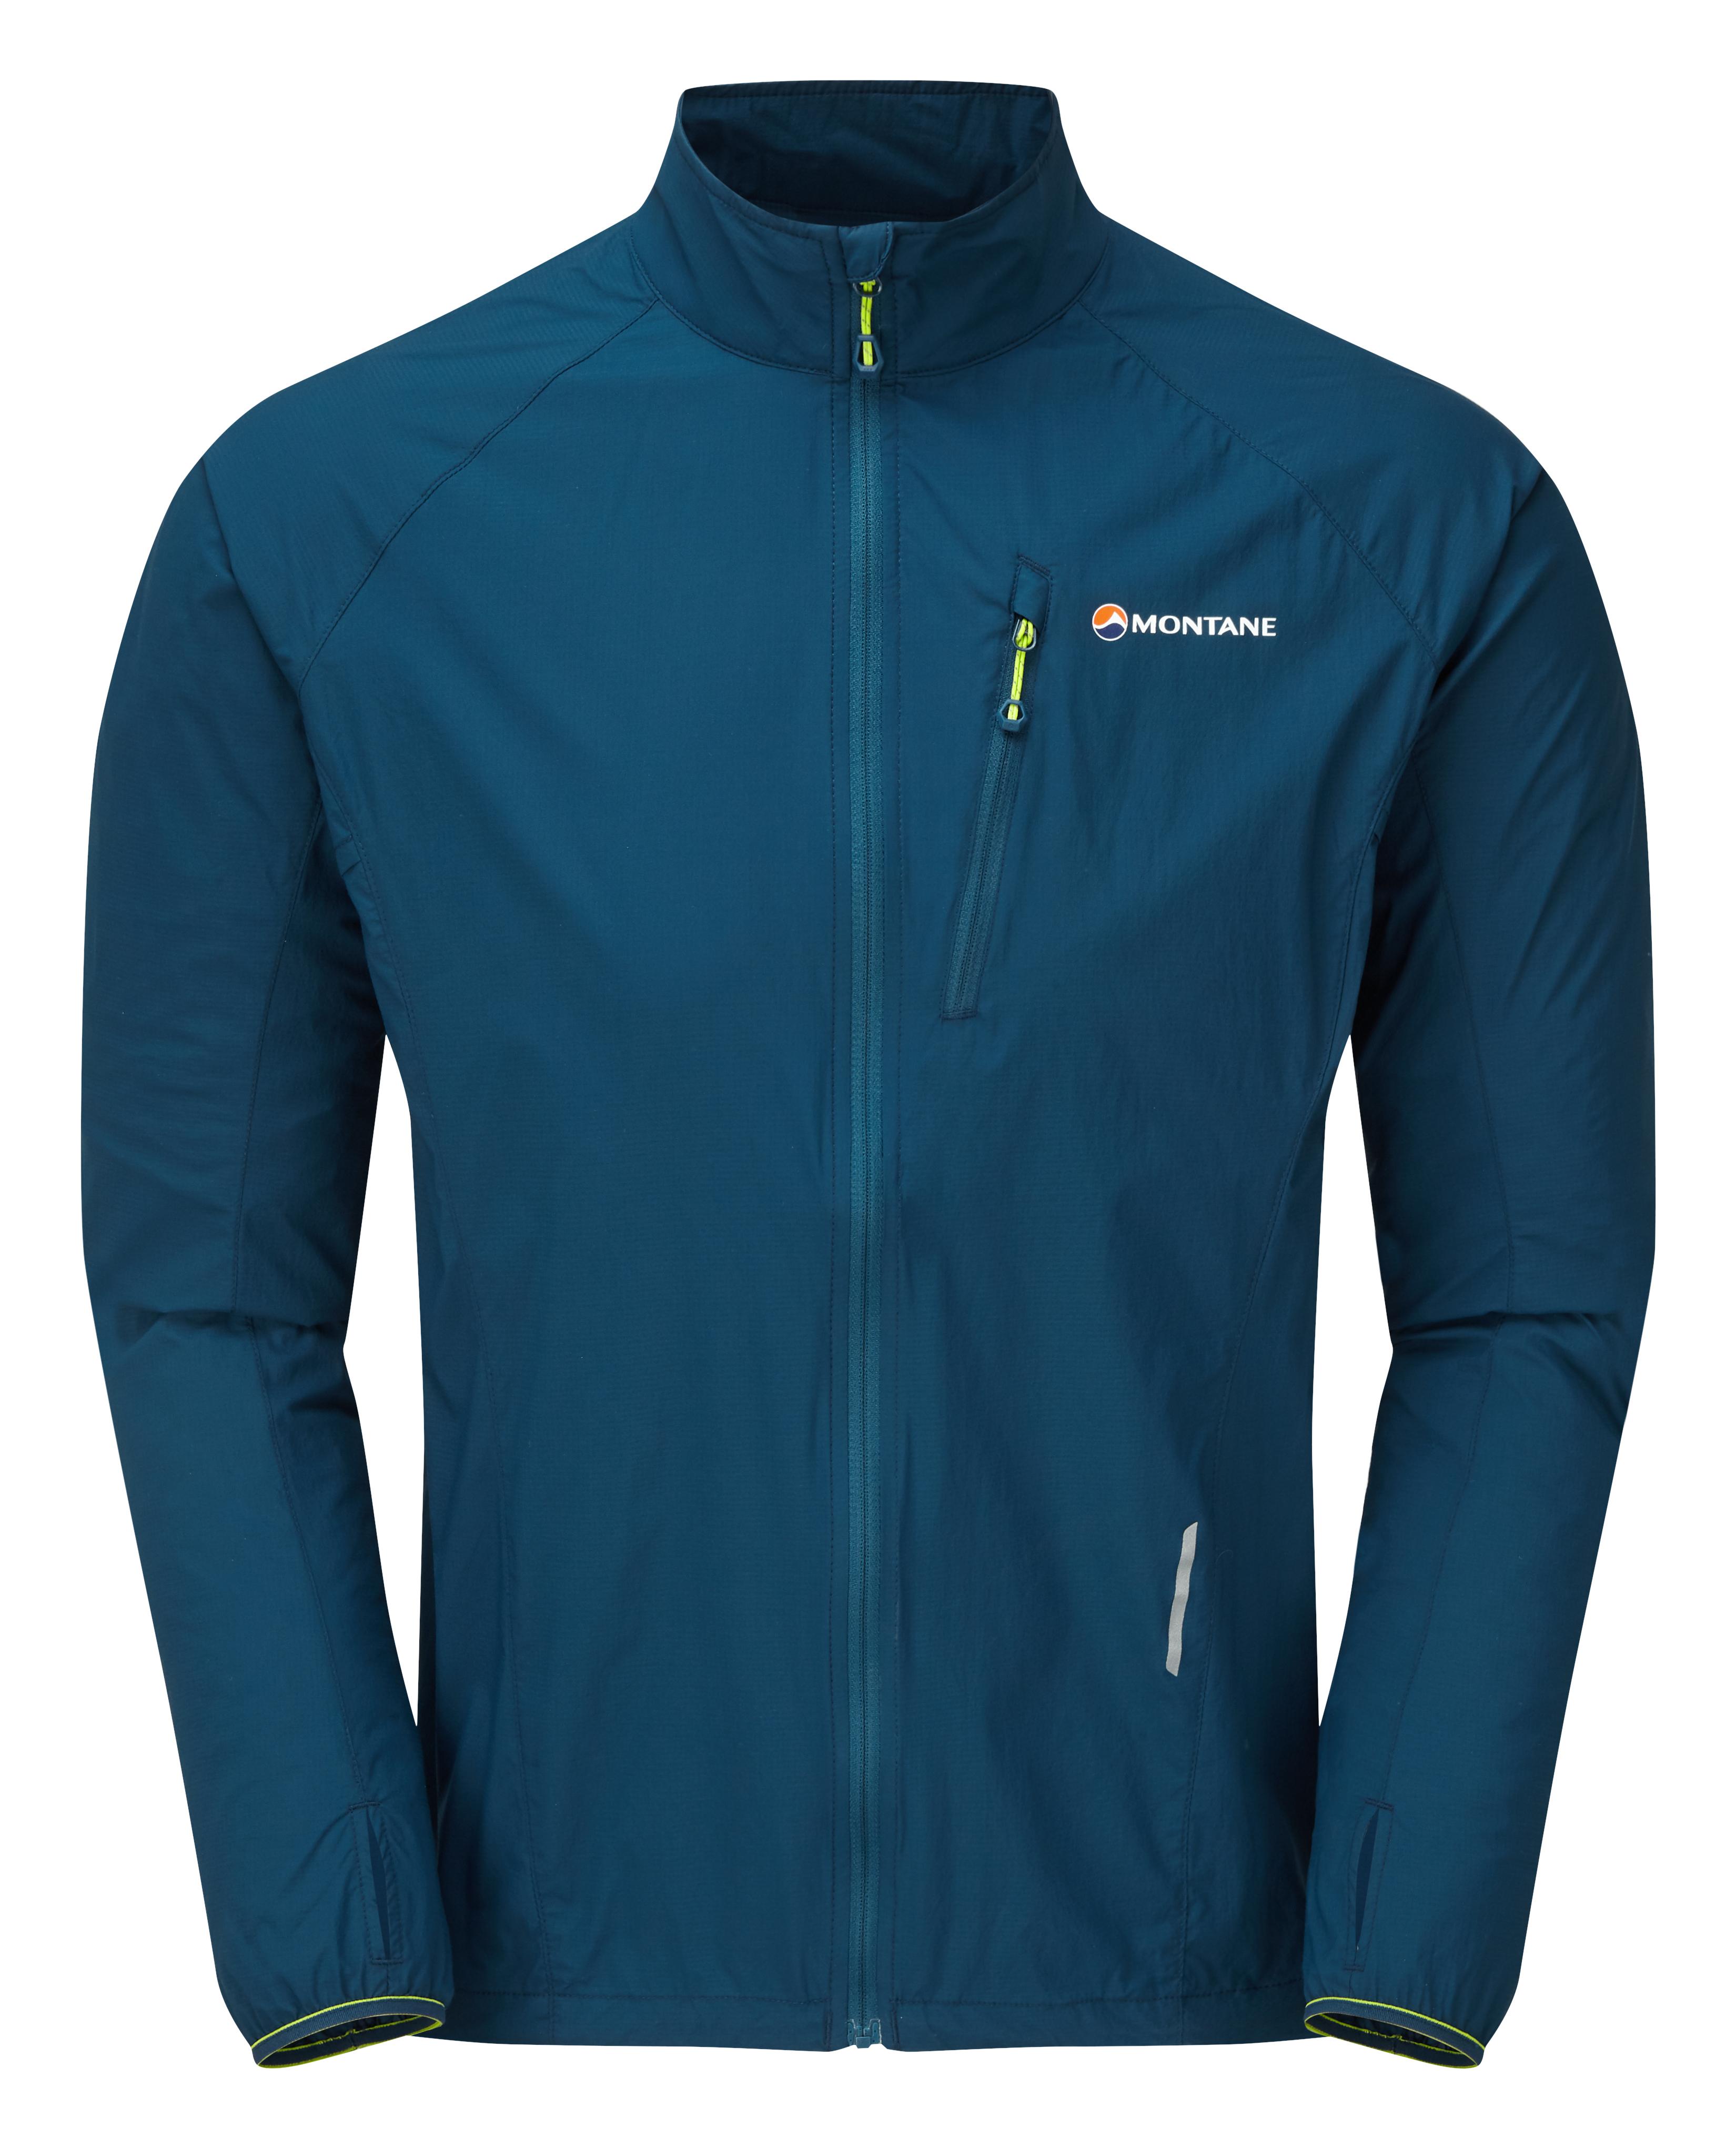 Montane Featherlite Trail Jacket - Narwhal Blue